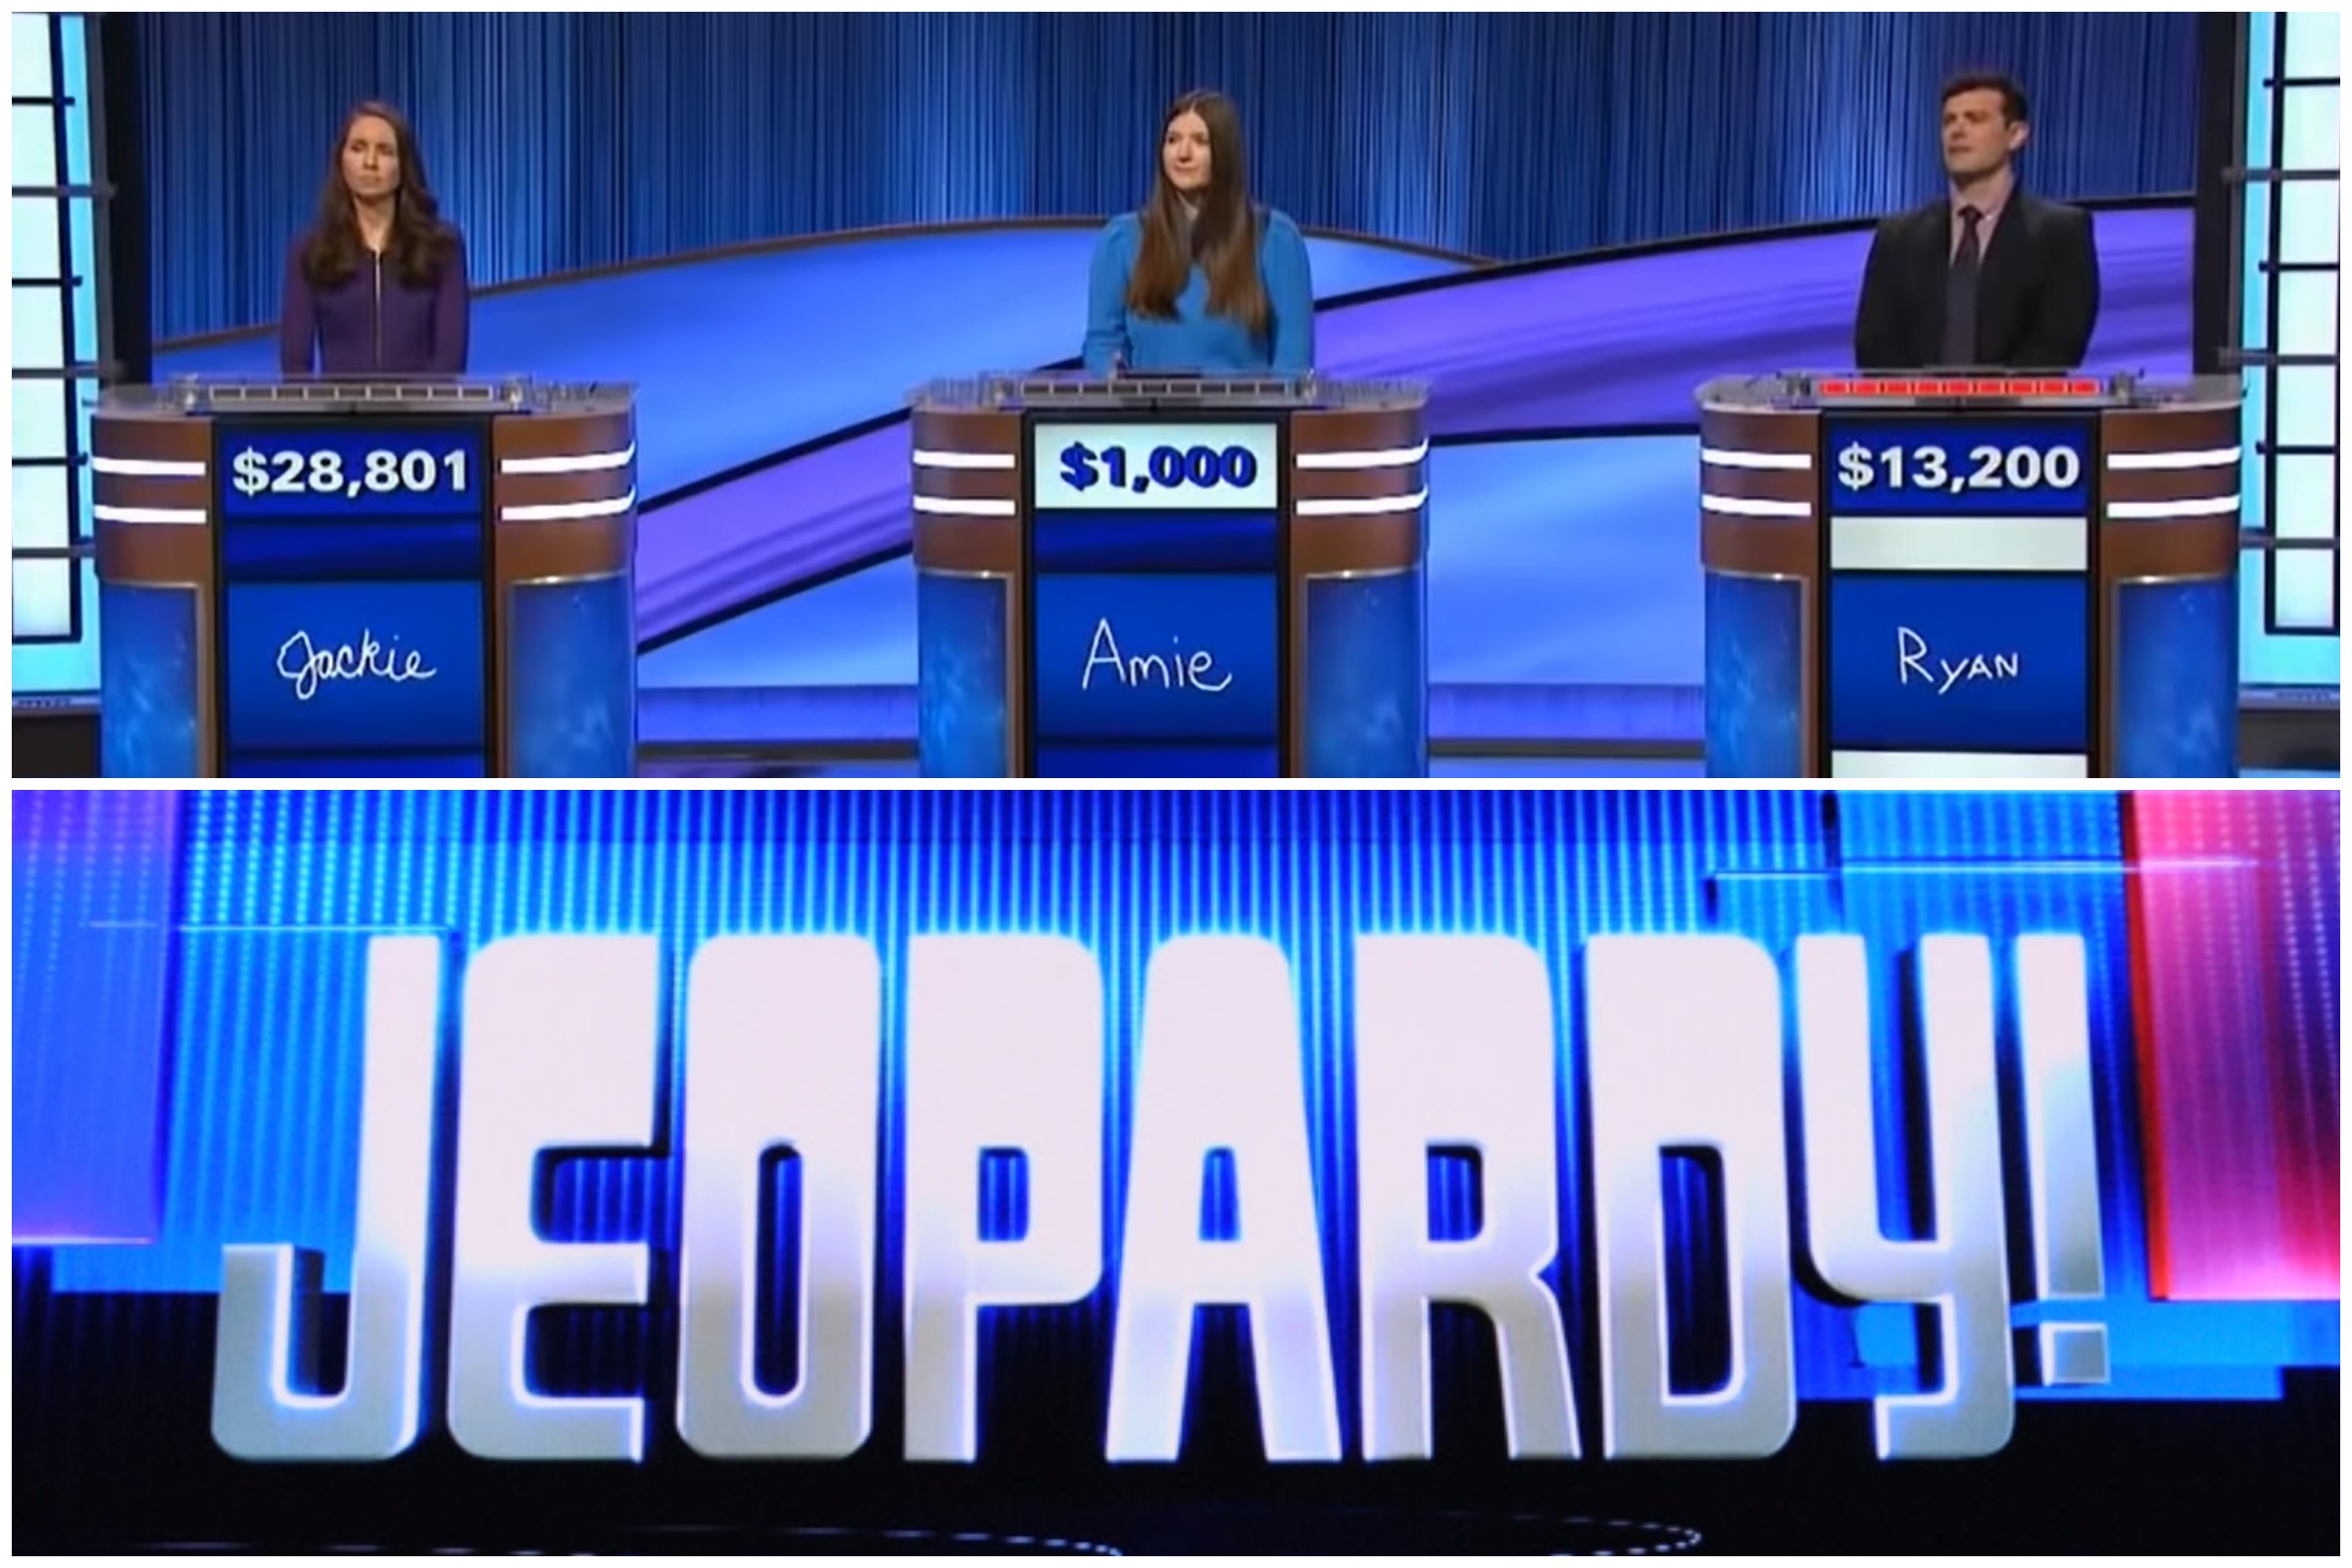 'Jeopardy!' Glitch Shows Contestant's Final Score Before End of Show